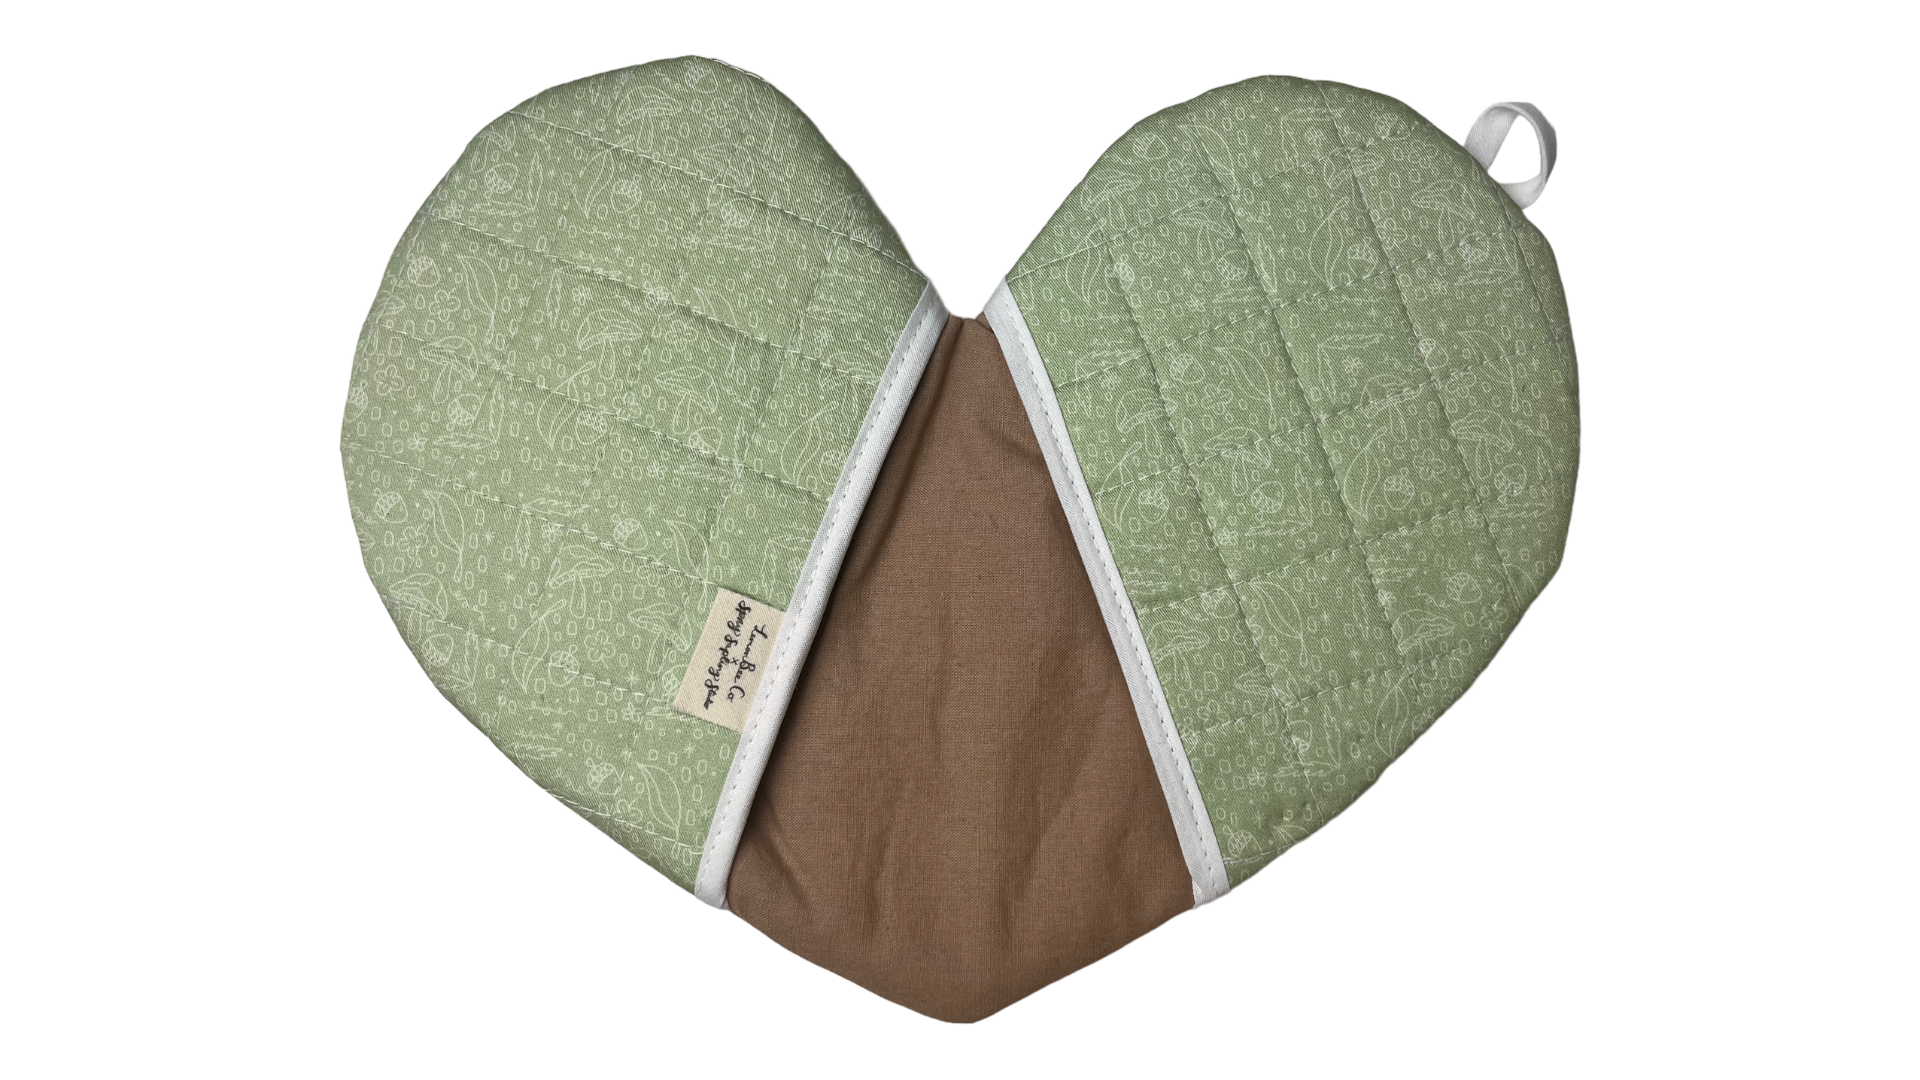 Heart Shaped Oven Mitts - 2 Patterns